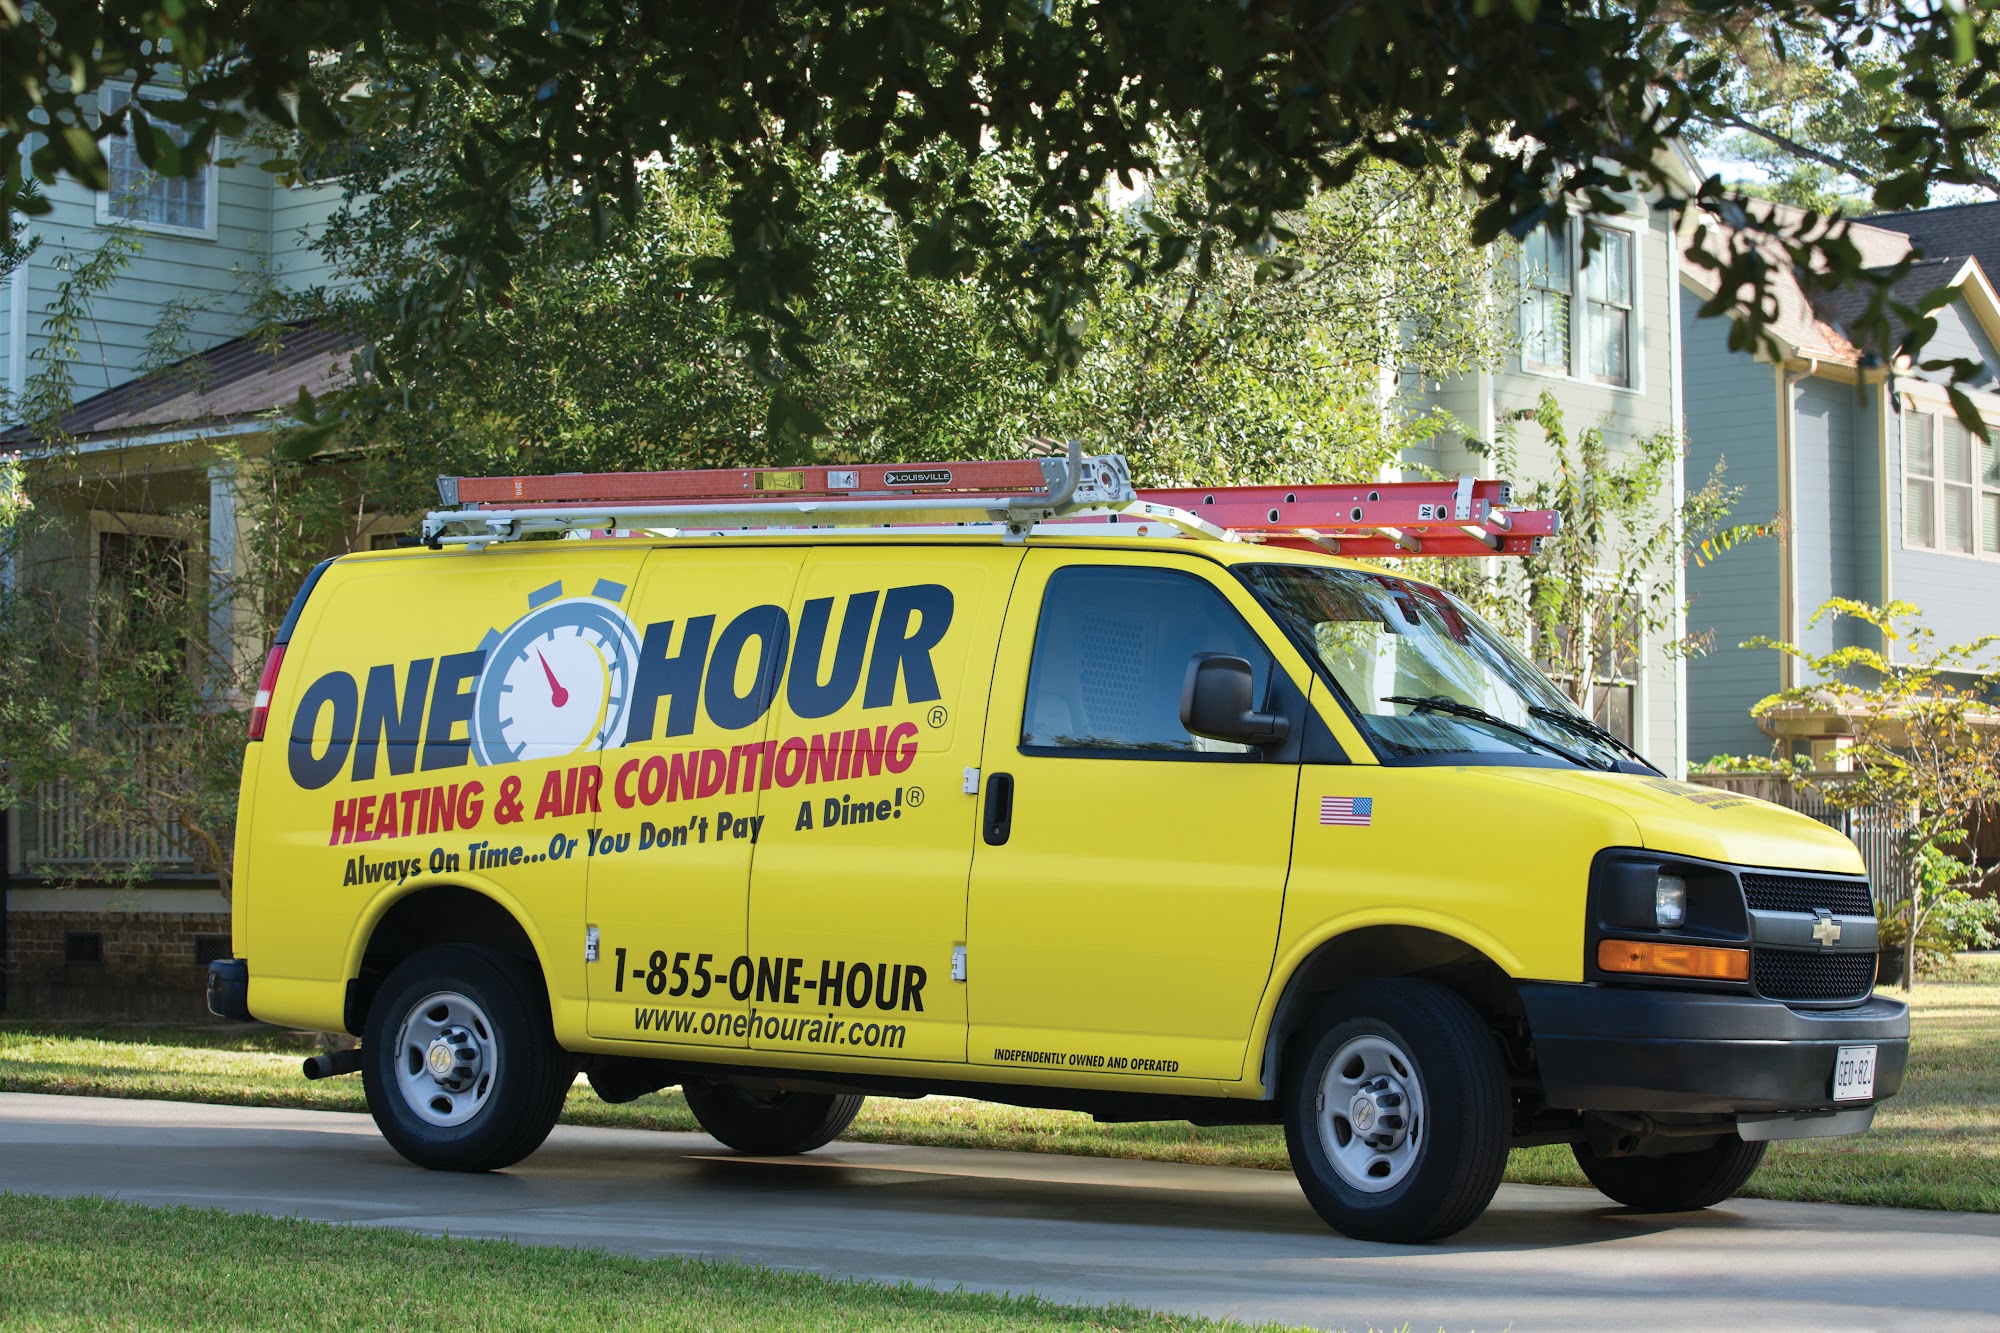 One Hour Heating & Air Conditioning® of Southeast Pennsylvania